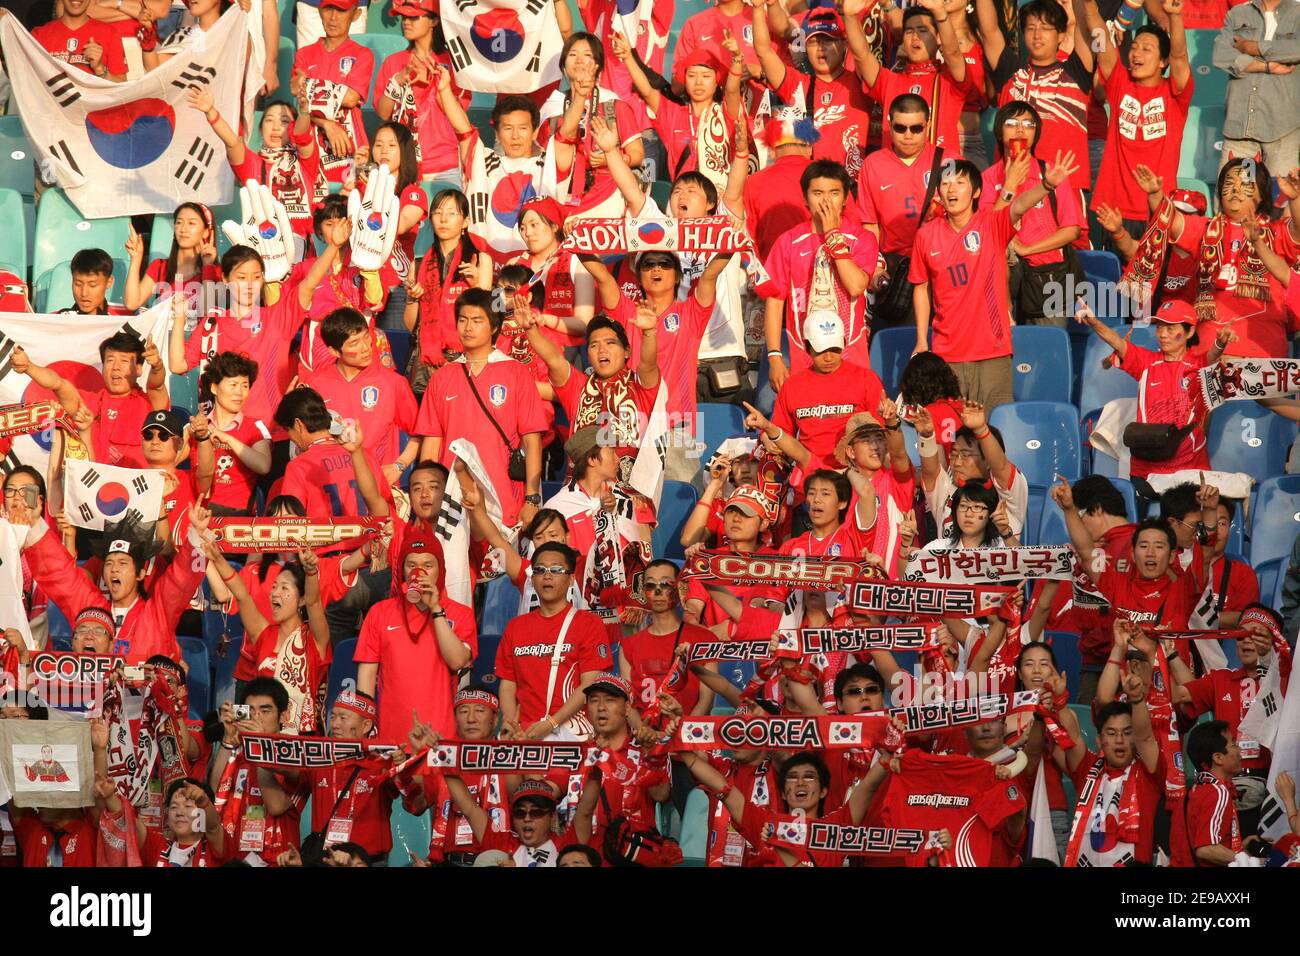 South Korea's Fans during the World Cup 2006, Group G, France vs South Korea at the Zentralstadion stadium in Leipzig, Germany on June 18, 2006. The game ended in a draw 1-1. Photo by Gouhier-Hahn-Orban/Cameleon/ABACAPRESS.COM Stock Photo